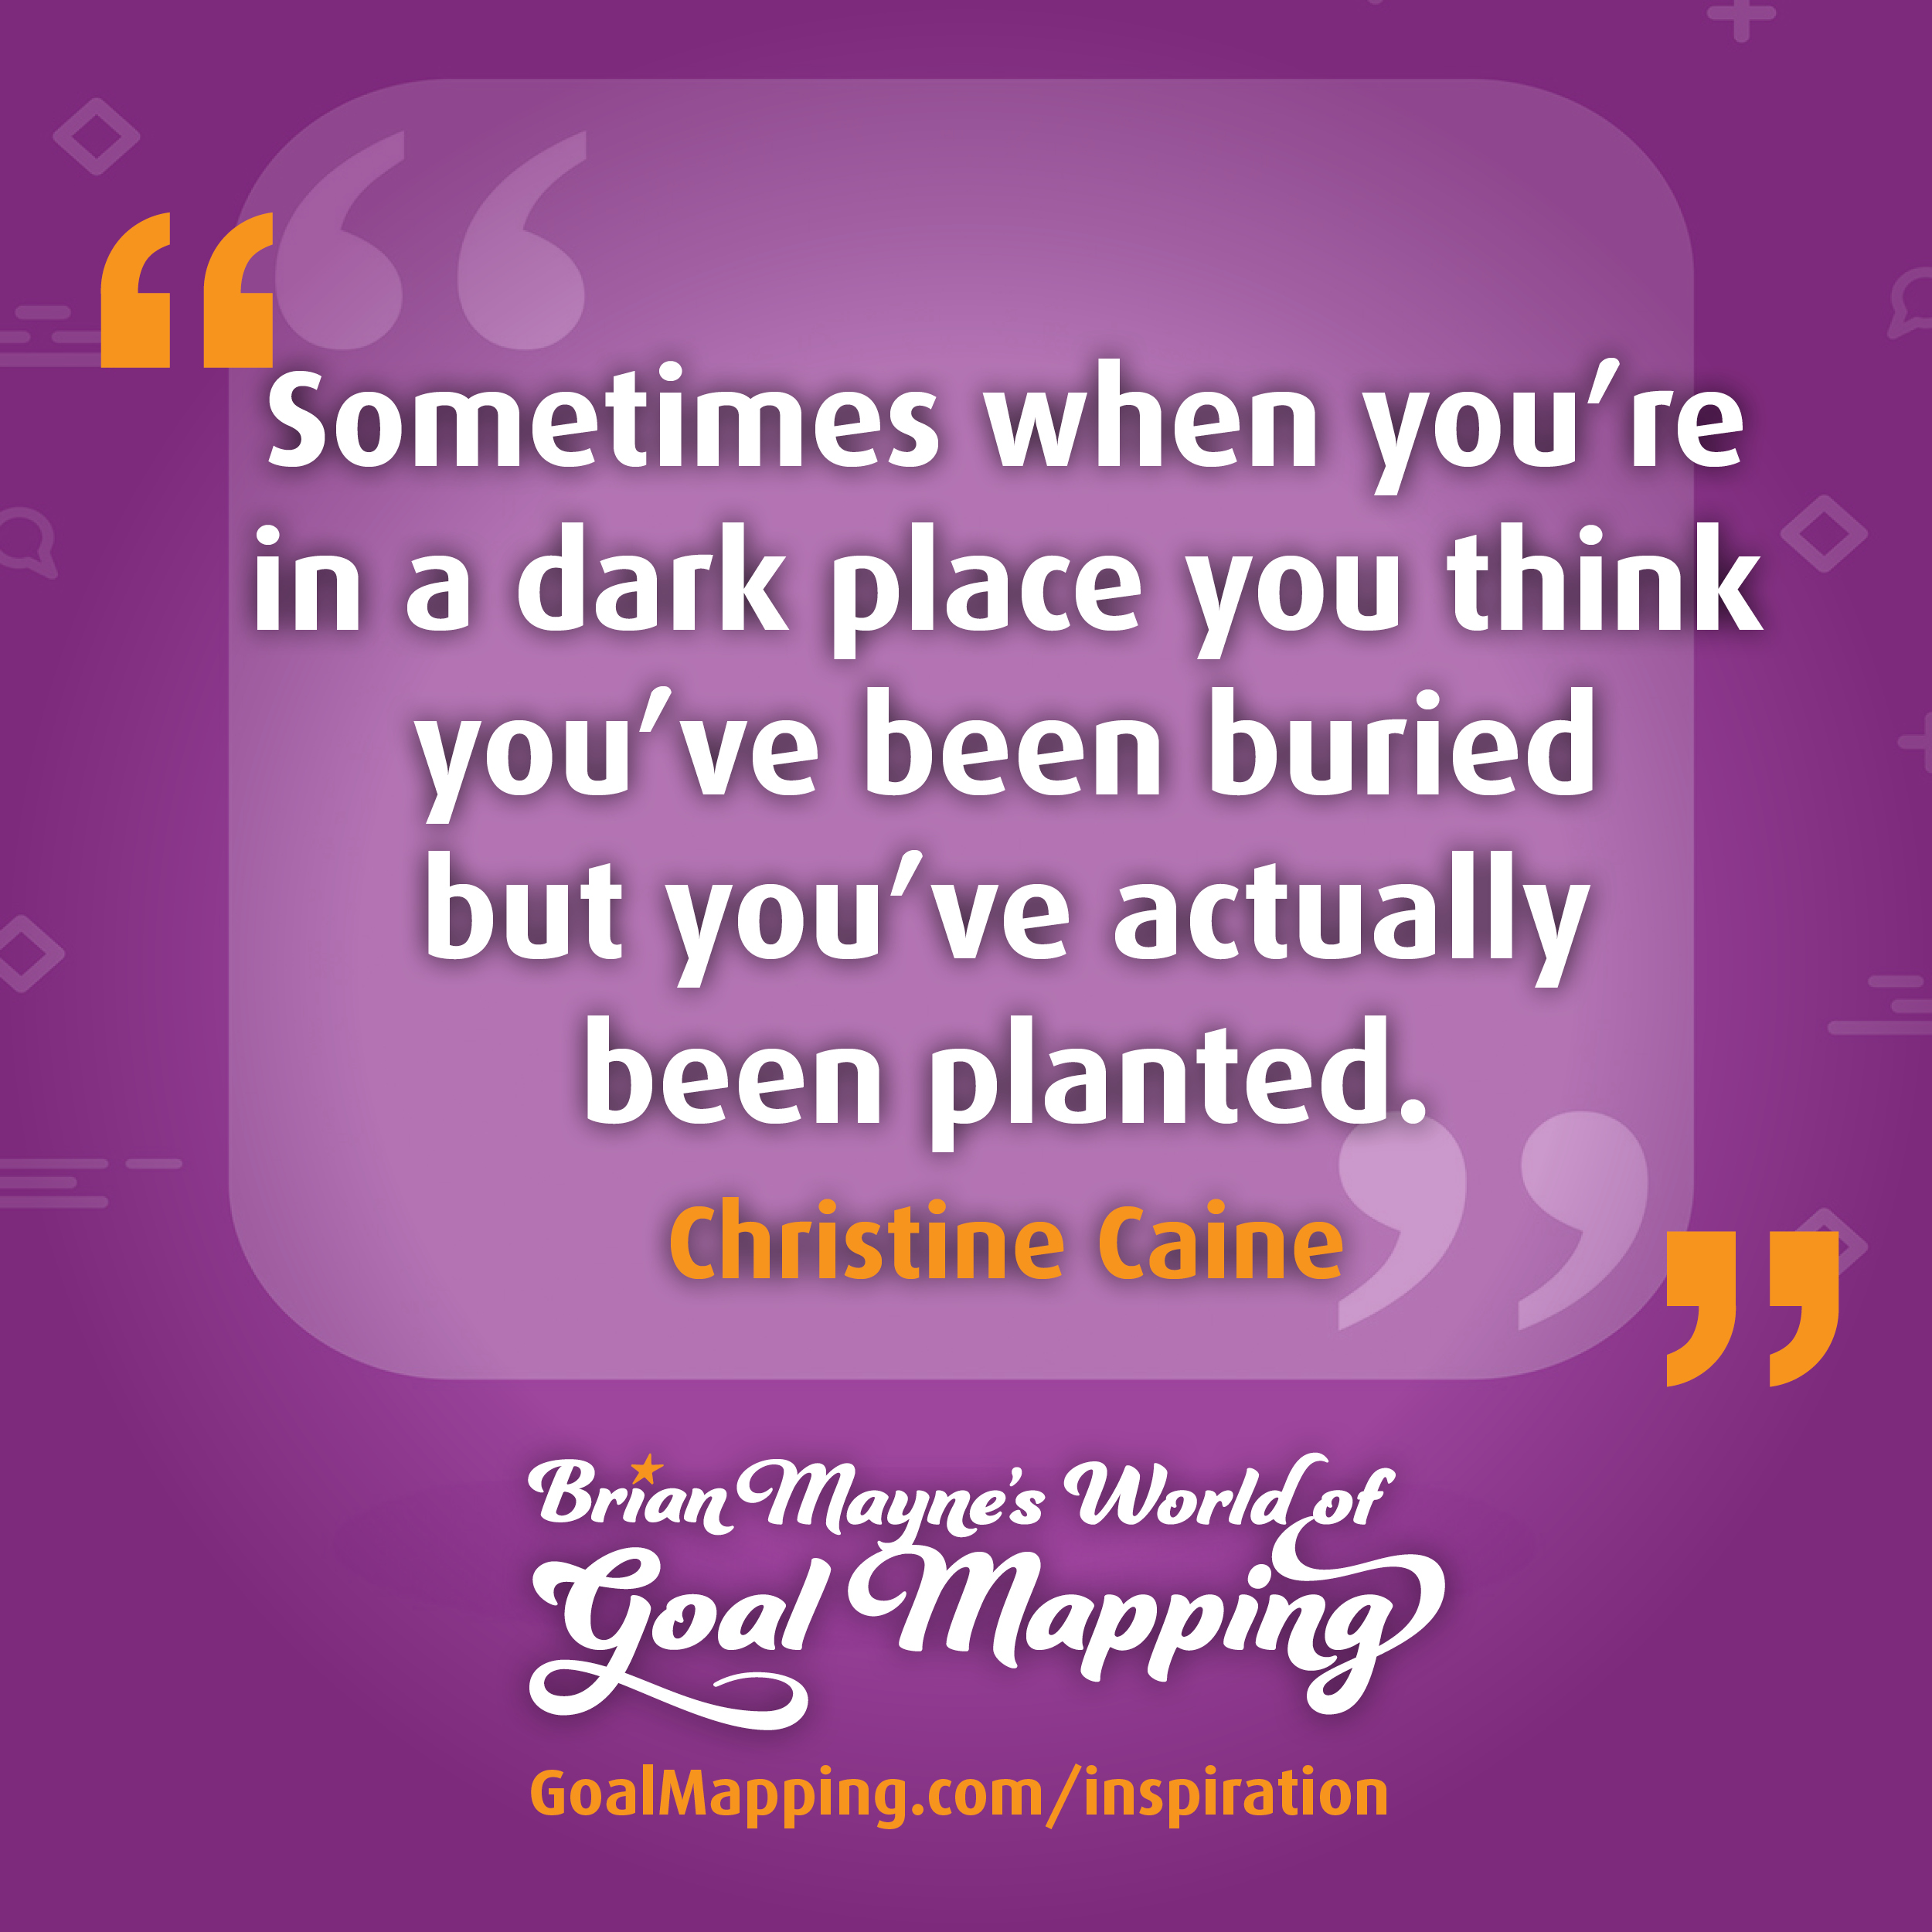 "Sometimes when you’re in a dark place you think you’ve been buried but you’ve actually been planted." Christine Caine